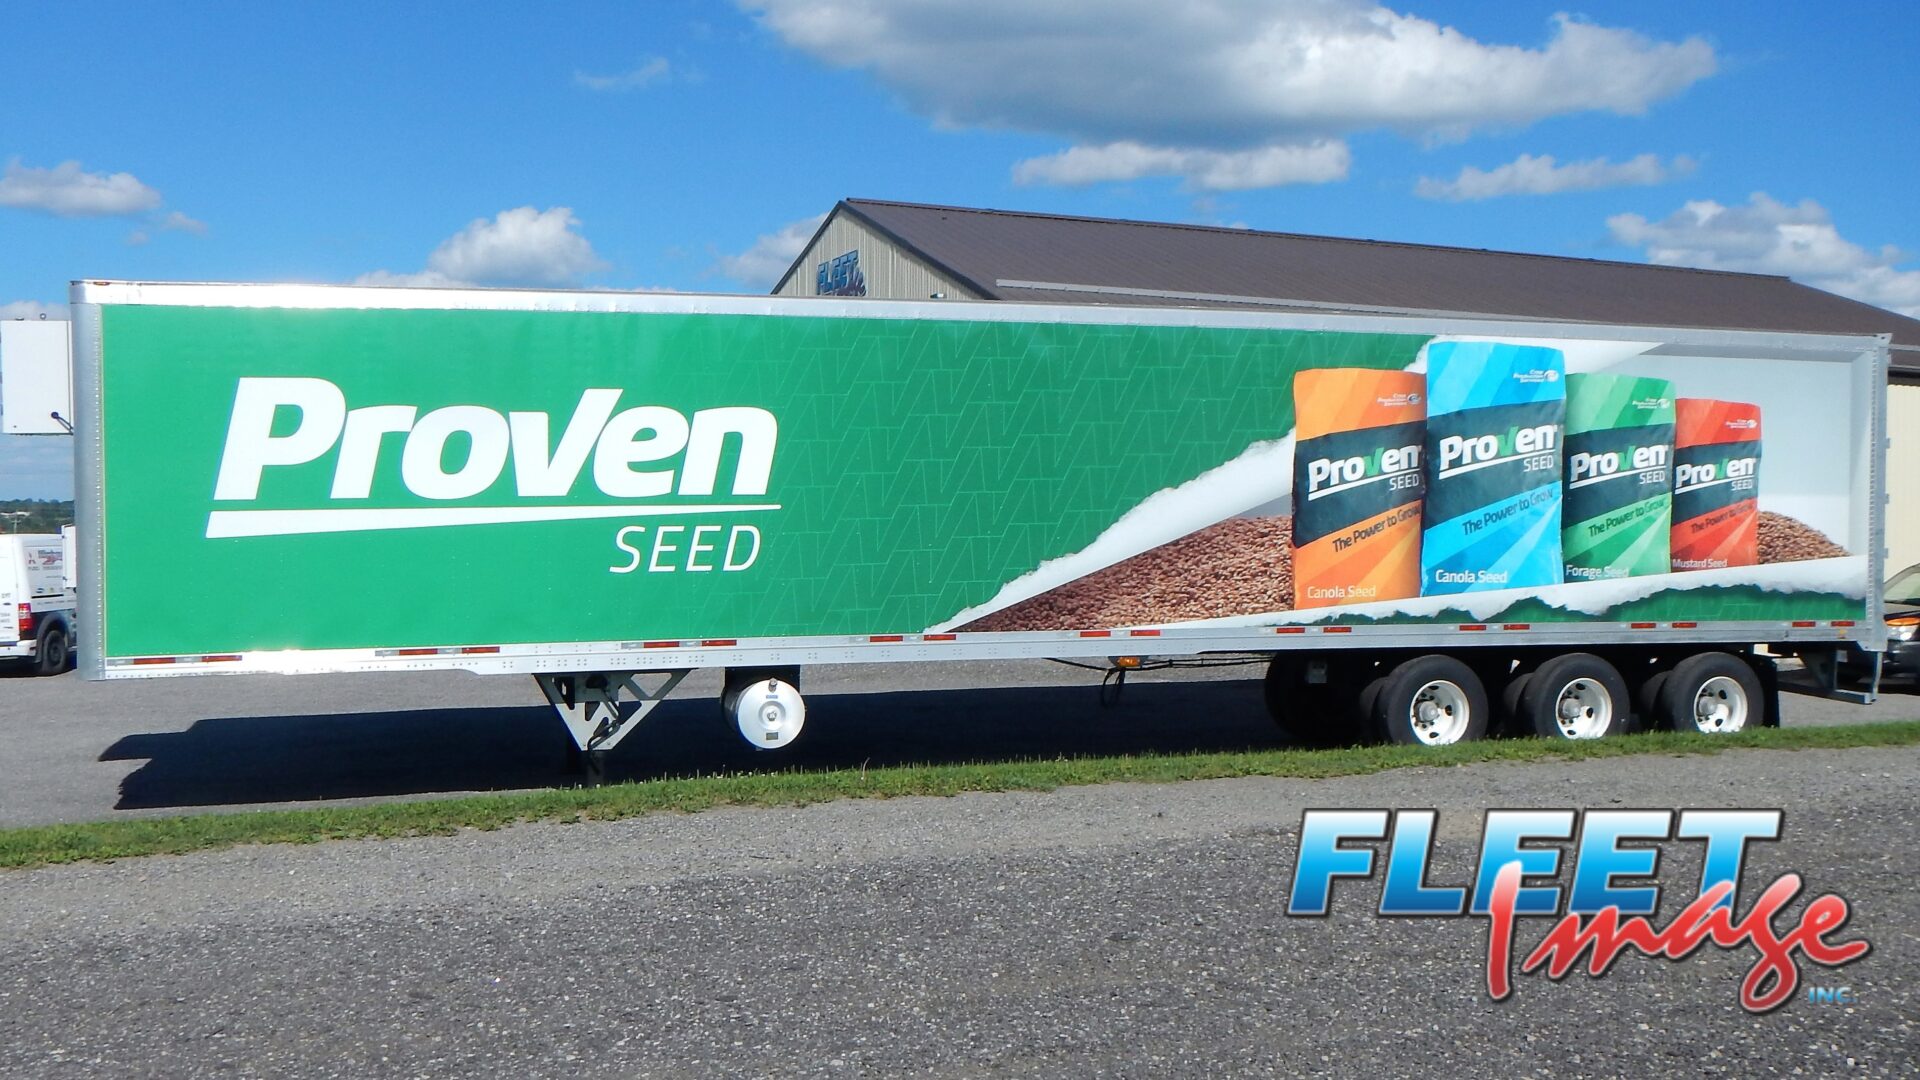 Proven Seed decal sticker on a truck